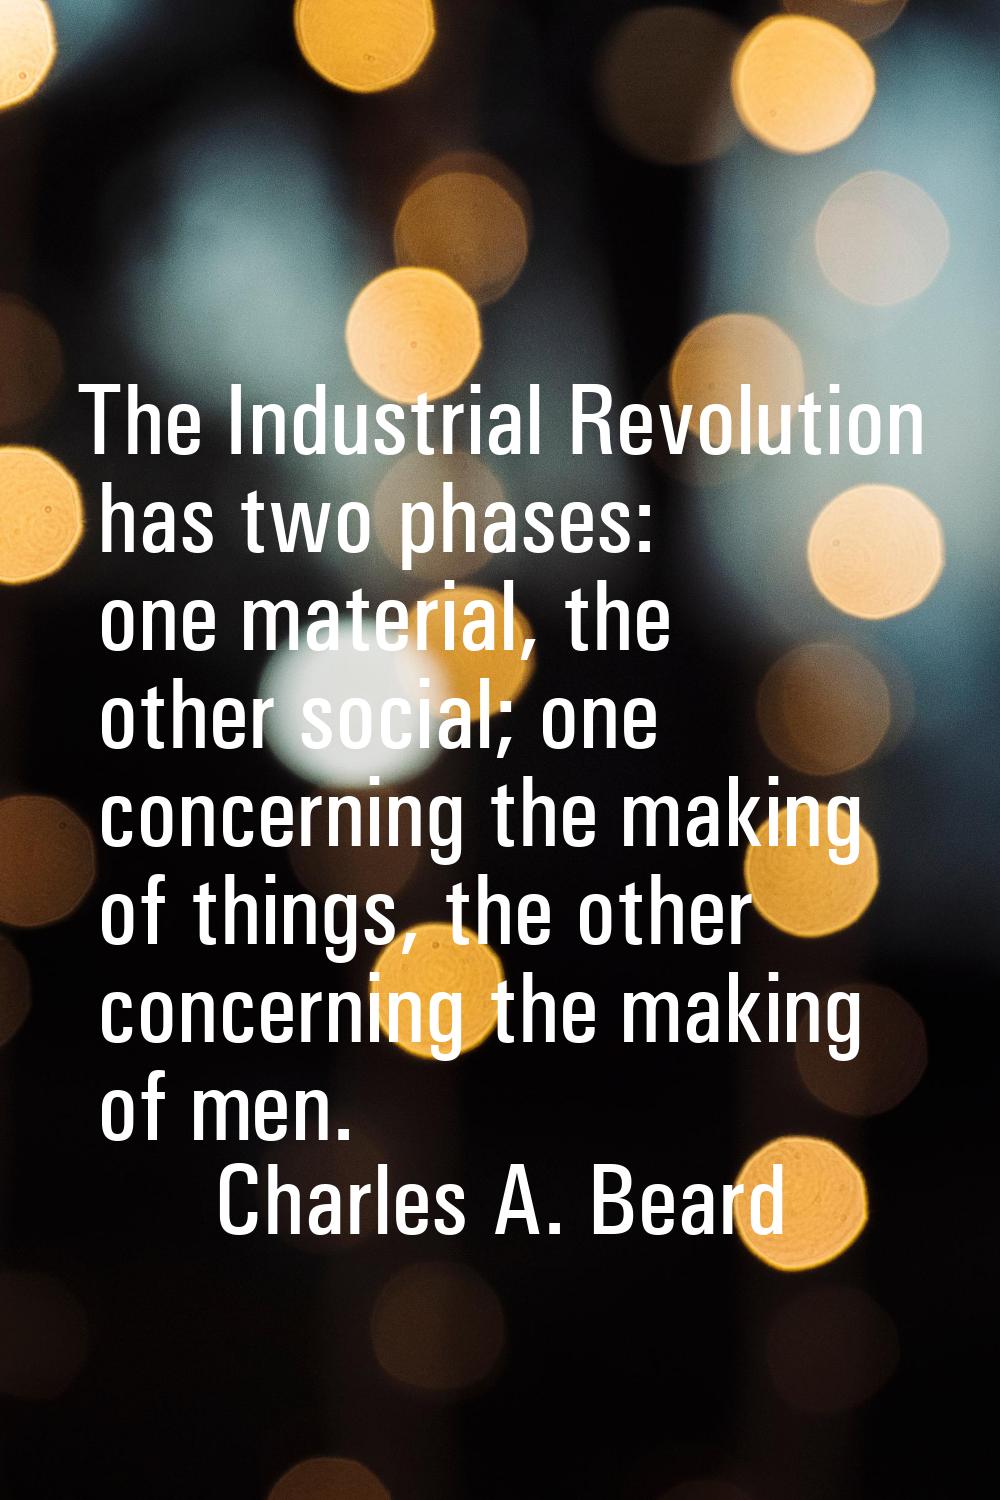 The Industrial Revolution has two phases: one material, the other social; one concerning the making